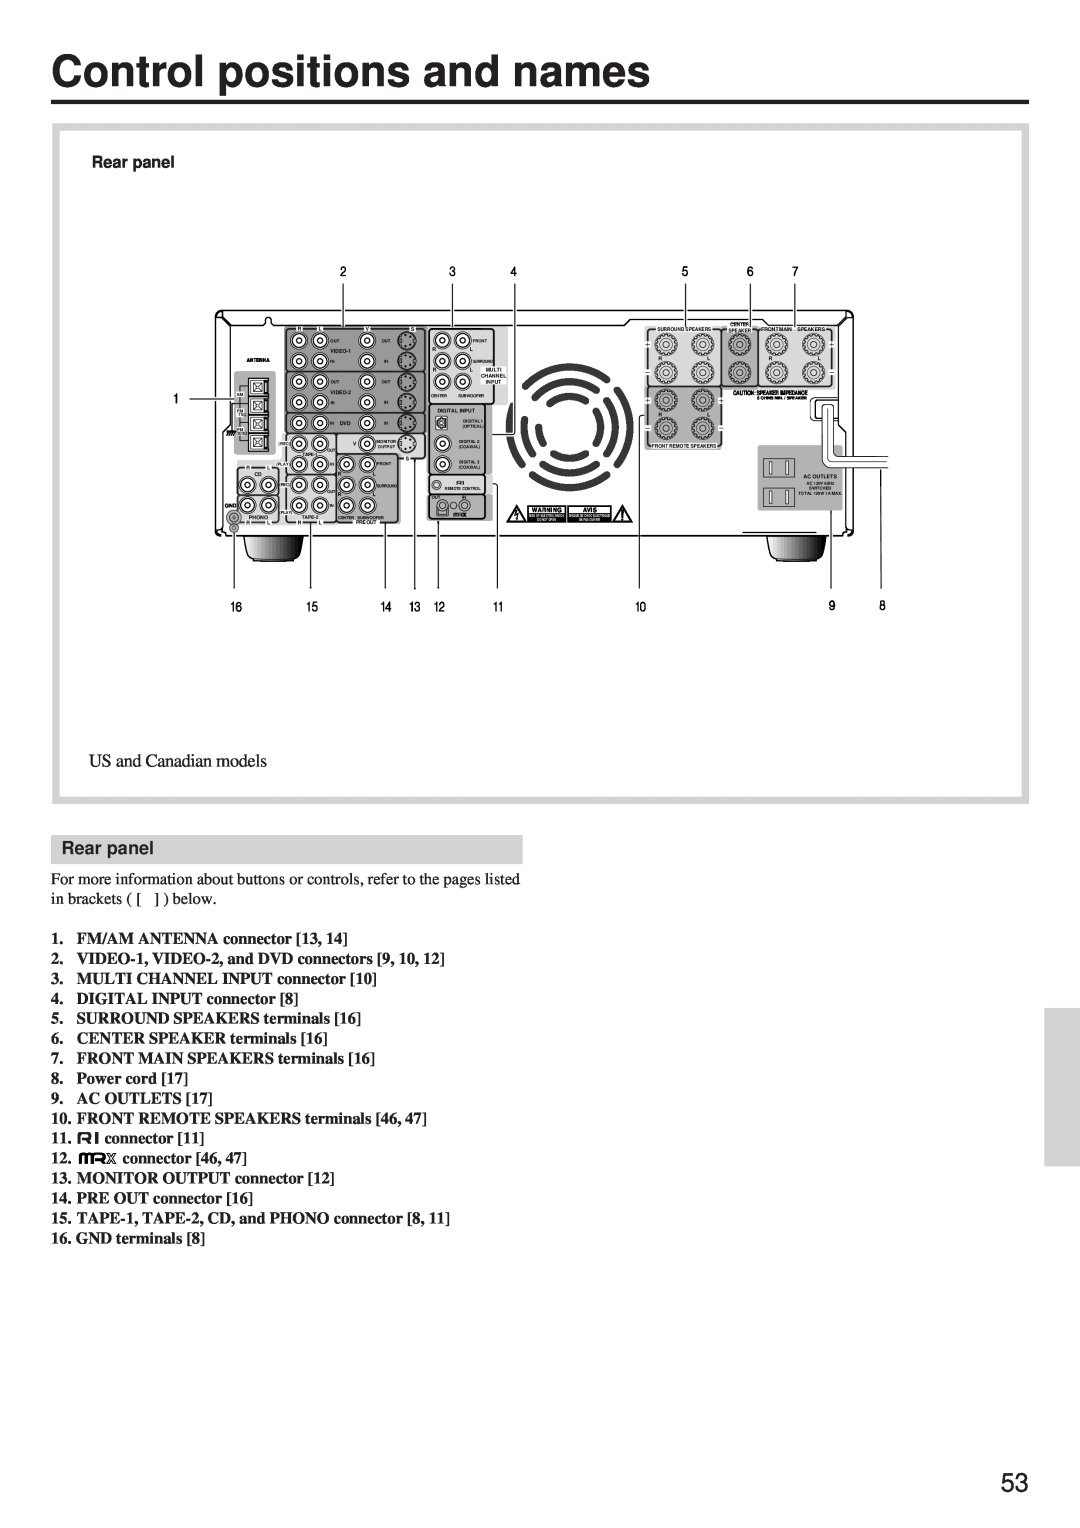 Onkyo TX-DS656 instruction manual Control positions and names, US and Canadian models, Rear panel 